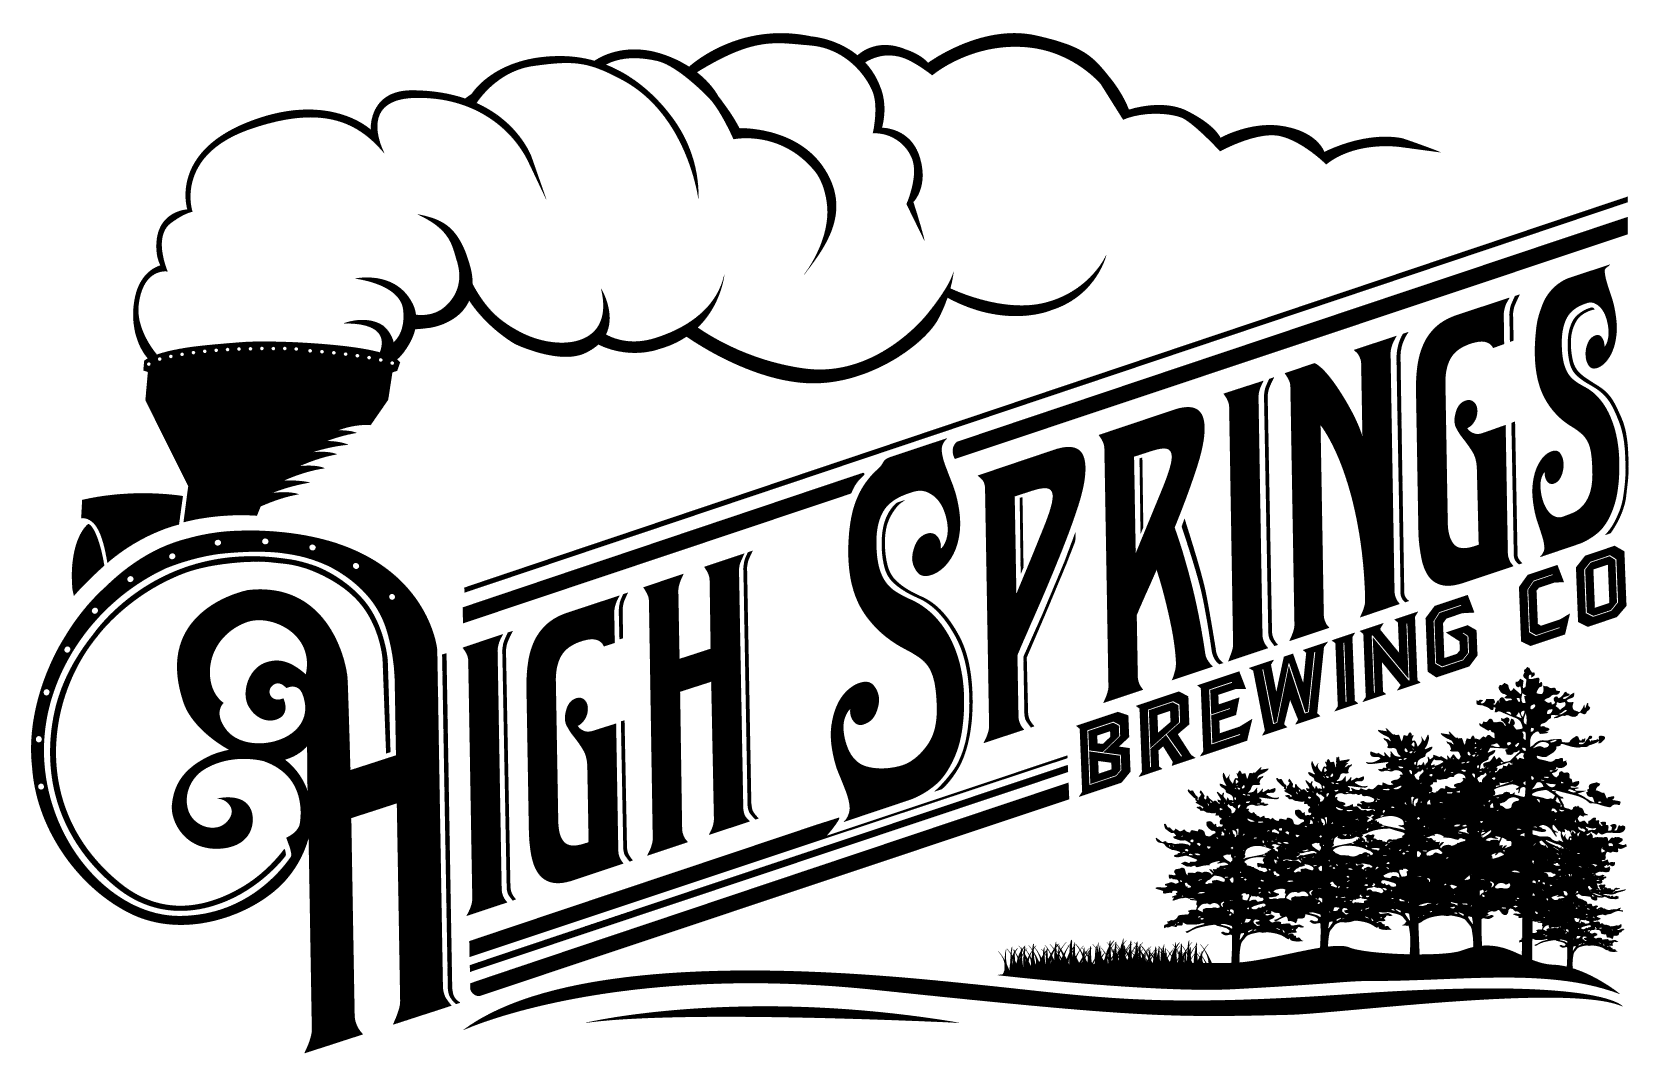 High Springs Brewing Company